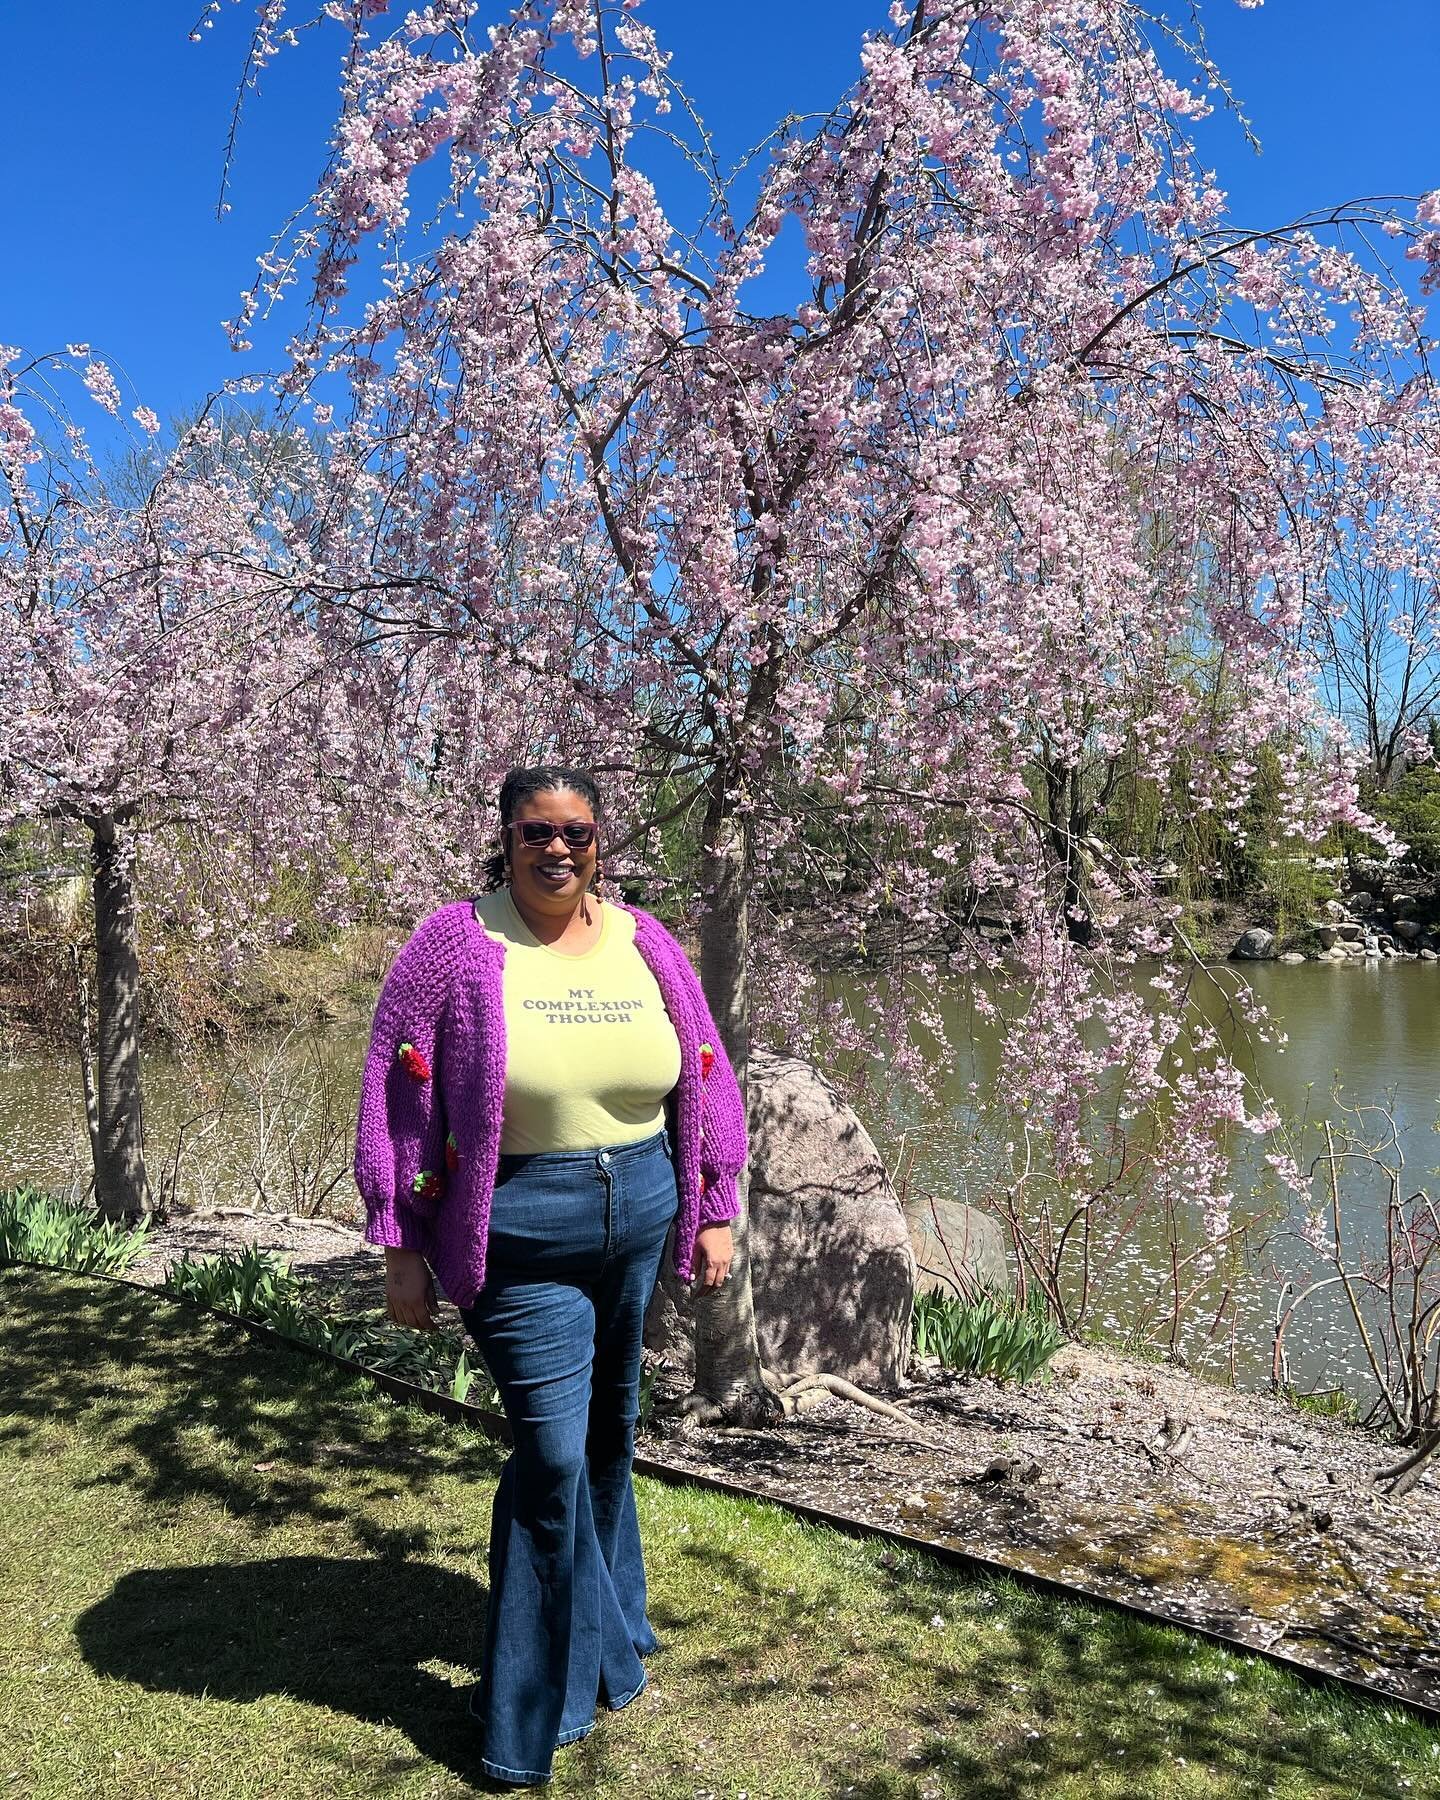 This is a cherry blossom 🌸 Stan account now lol. It was so beautiful and sunny but a bit chilly with the wind and 50&deg; so I busted out my strawberry cardigan I knitted last year. 💜💜. Thanks for joining me today @its_jess_may.